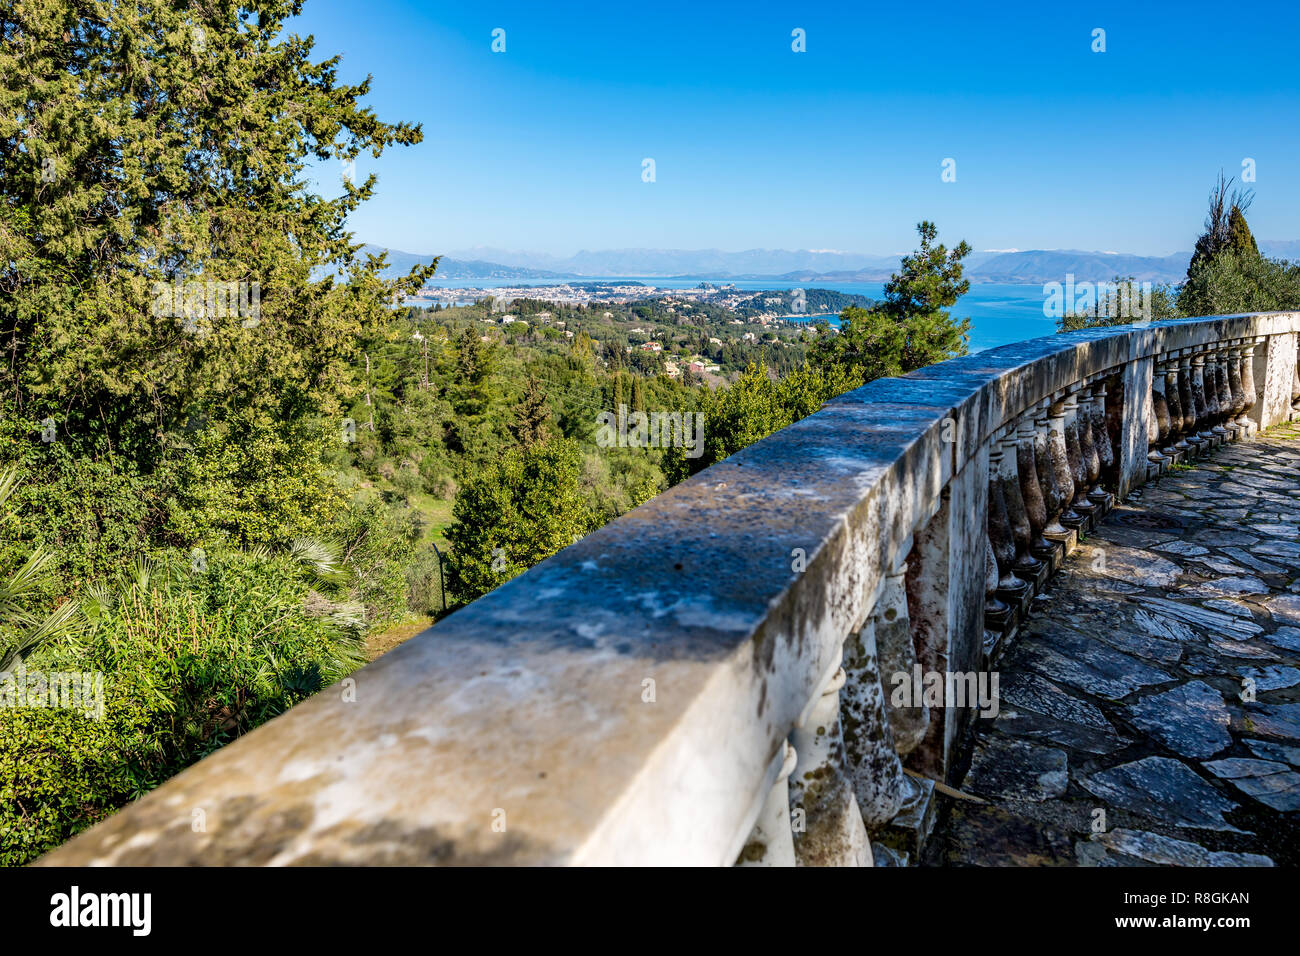 Scenery panoramic landscape view, spring clear blue sky picture from the terrace of Achilleion Museum, Corfu, Kerkira Island, Greece Stock Photo